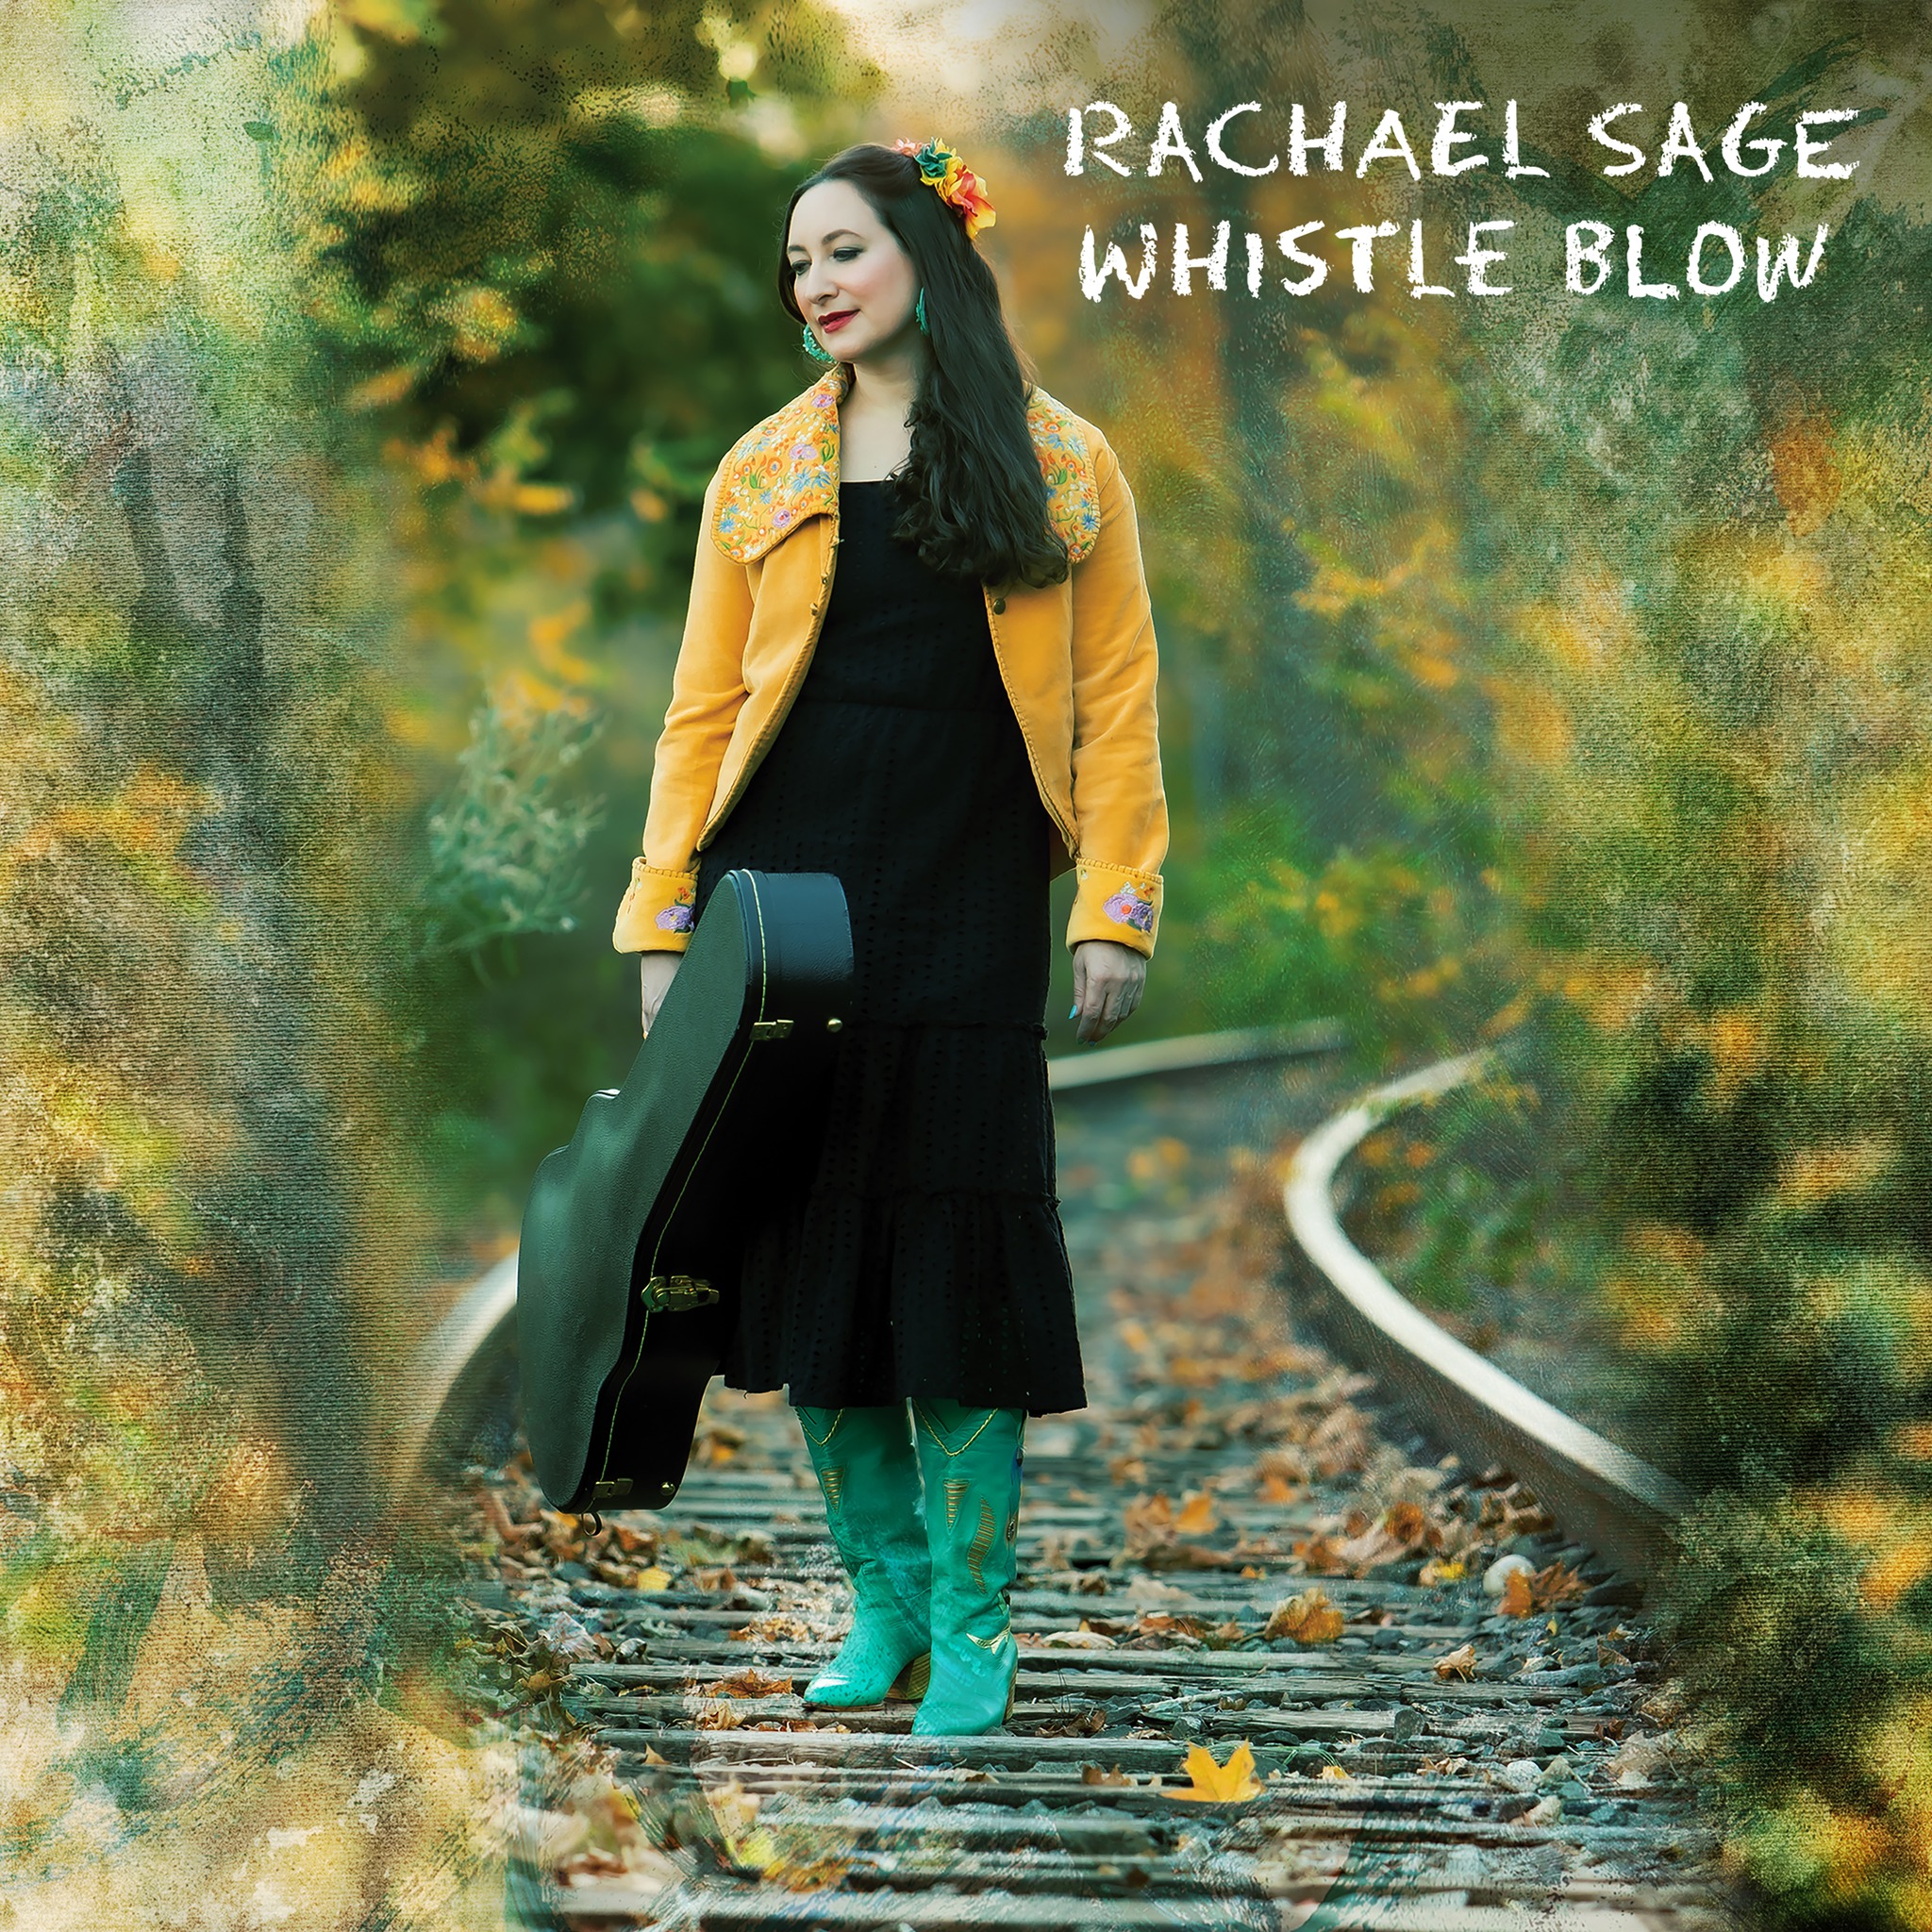 Rachael Sage Releases New Single "Whistle Blow"